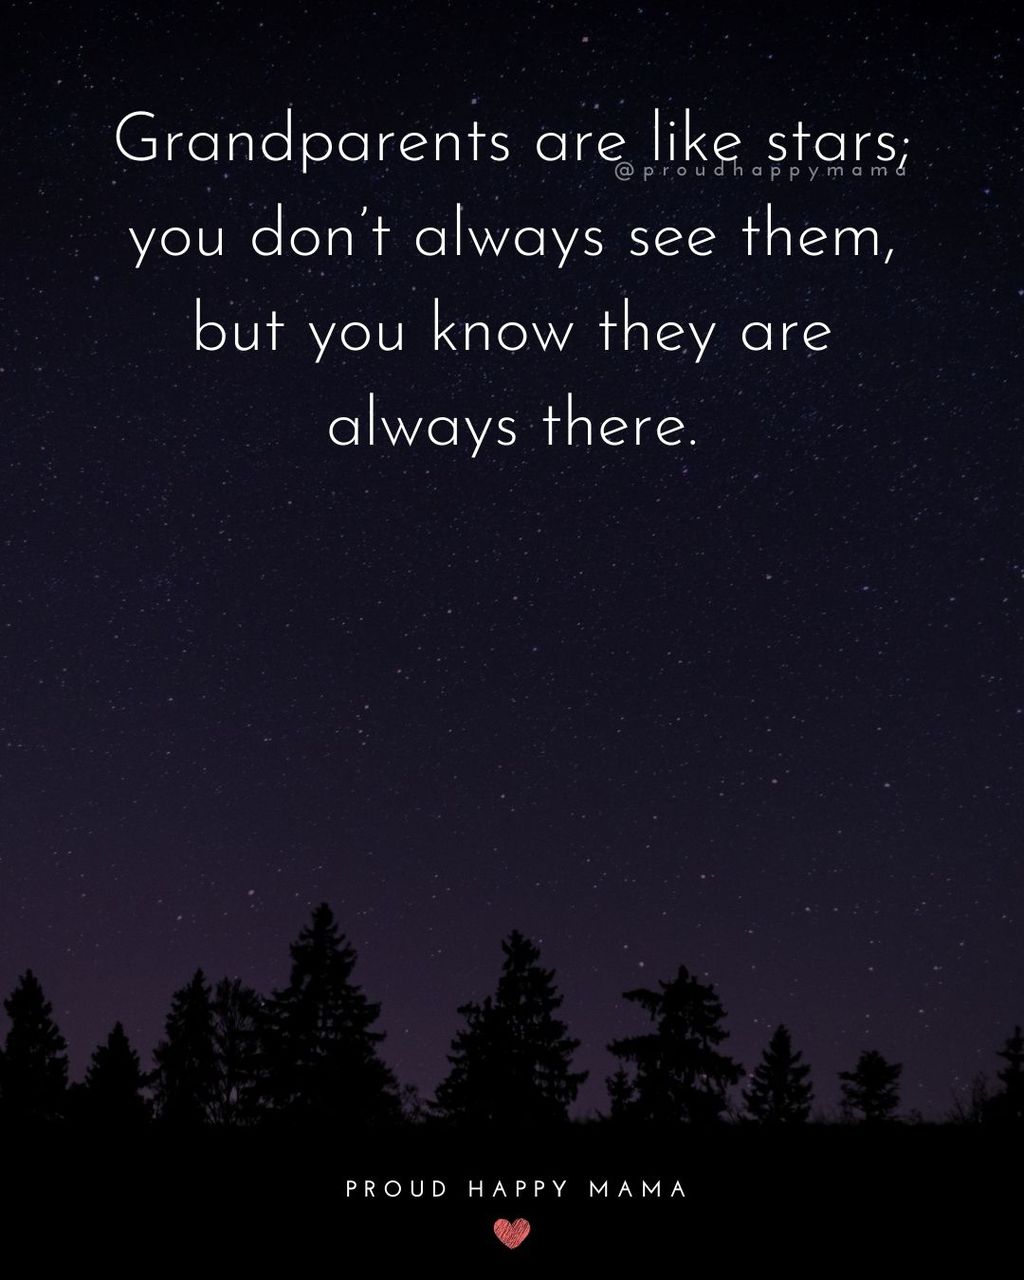 Grandparent Quotes | Grandparents are like stars; you don’t always see them, but you know they are always there.